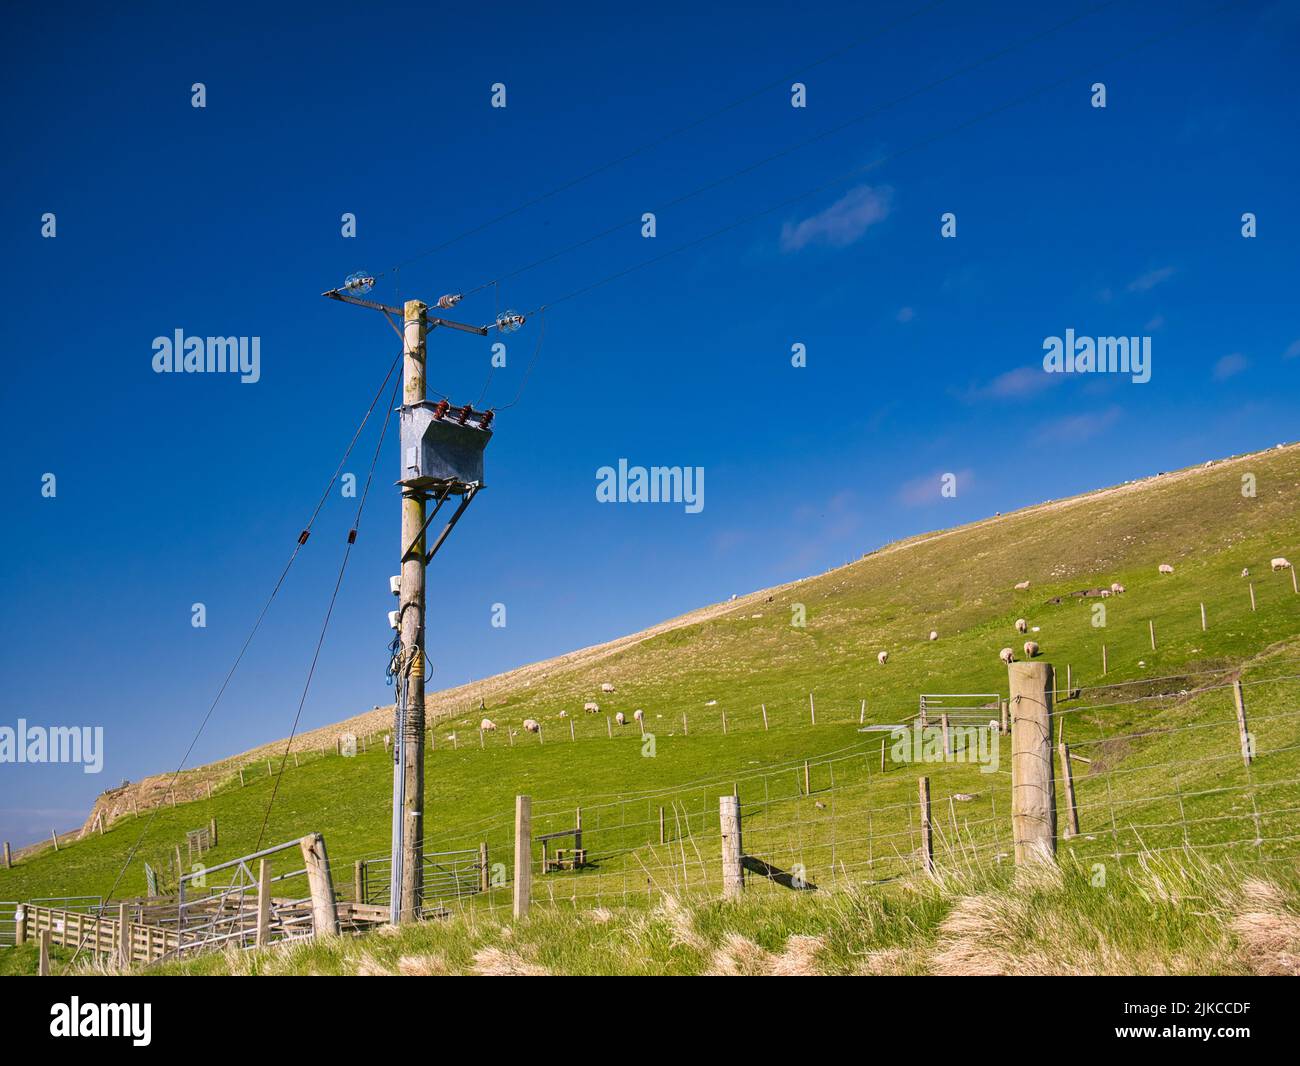 An electricity supply pylon delivering rural power through the UK national grid showing power cables, isolators and other equipment. Stock Photo